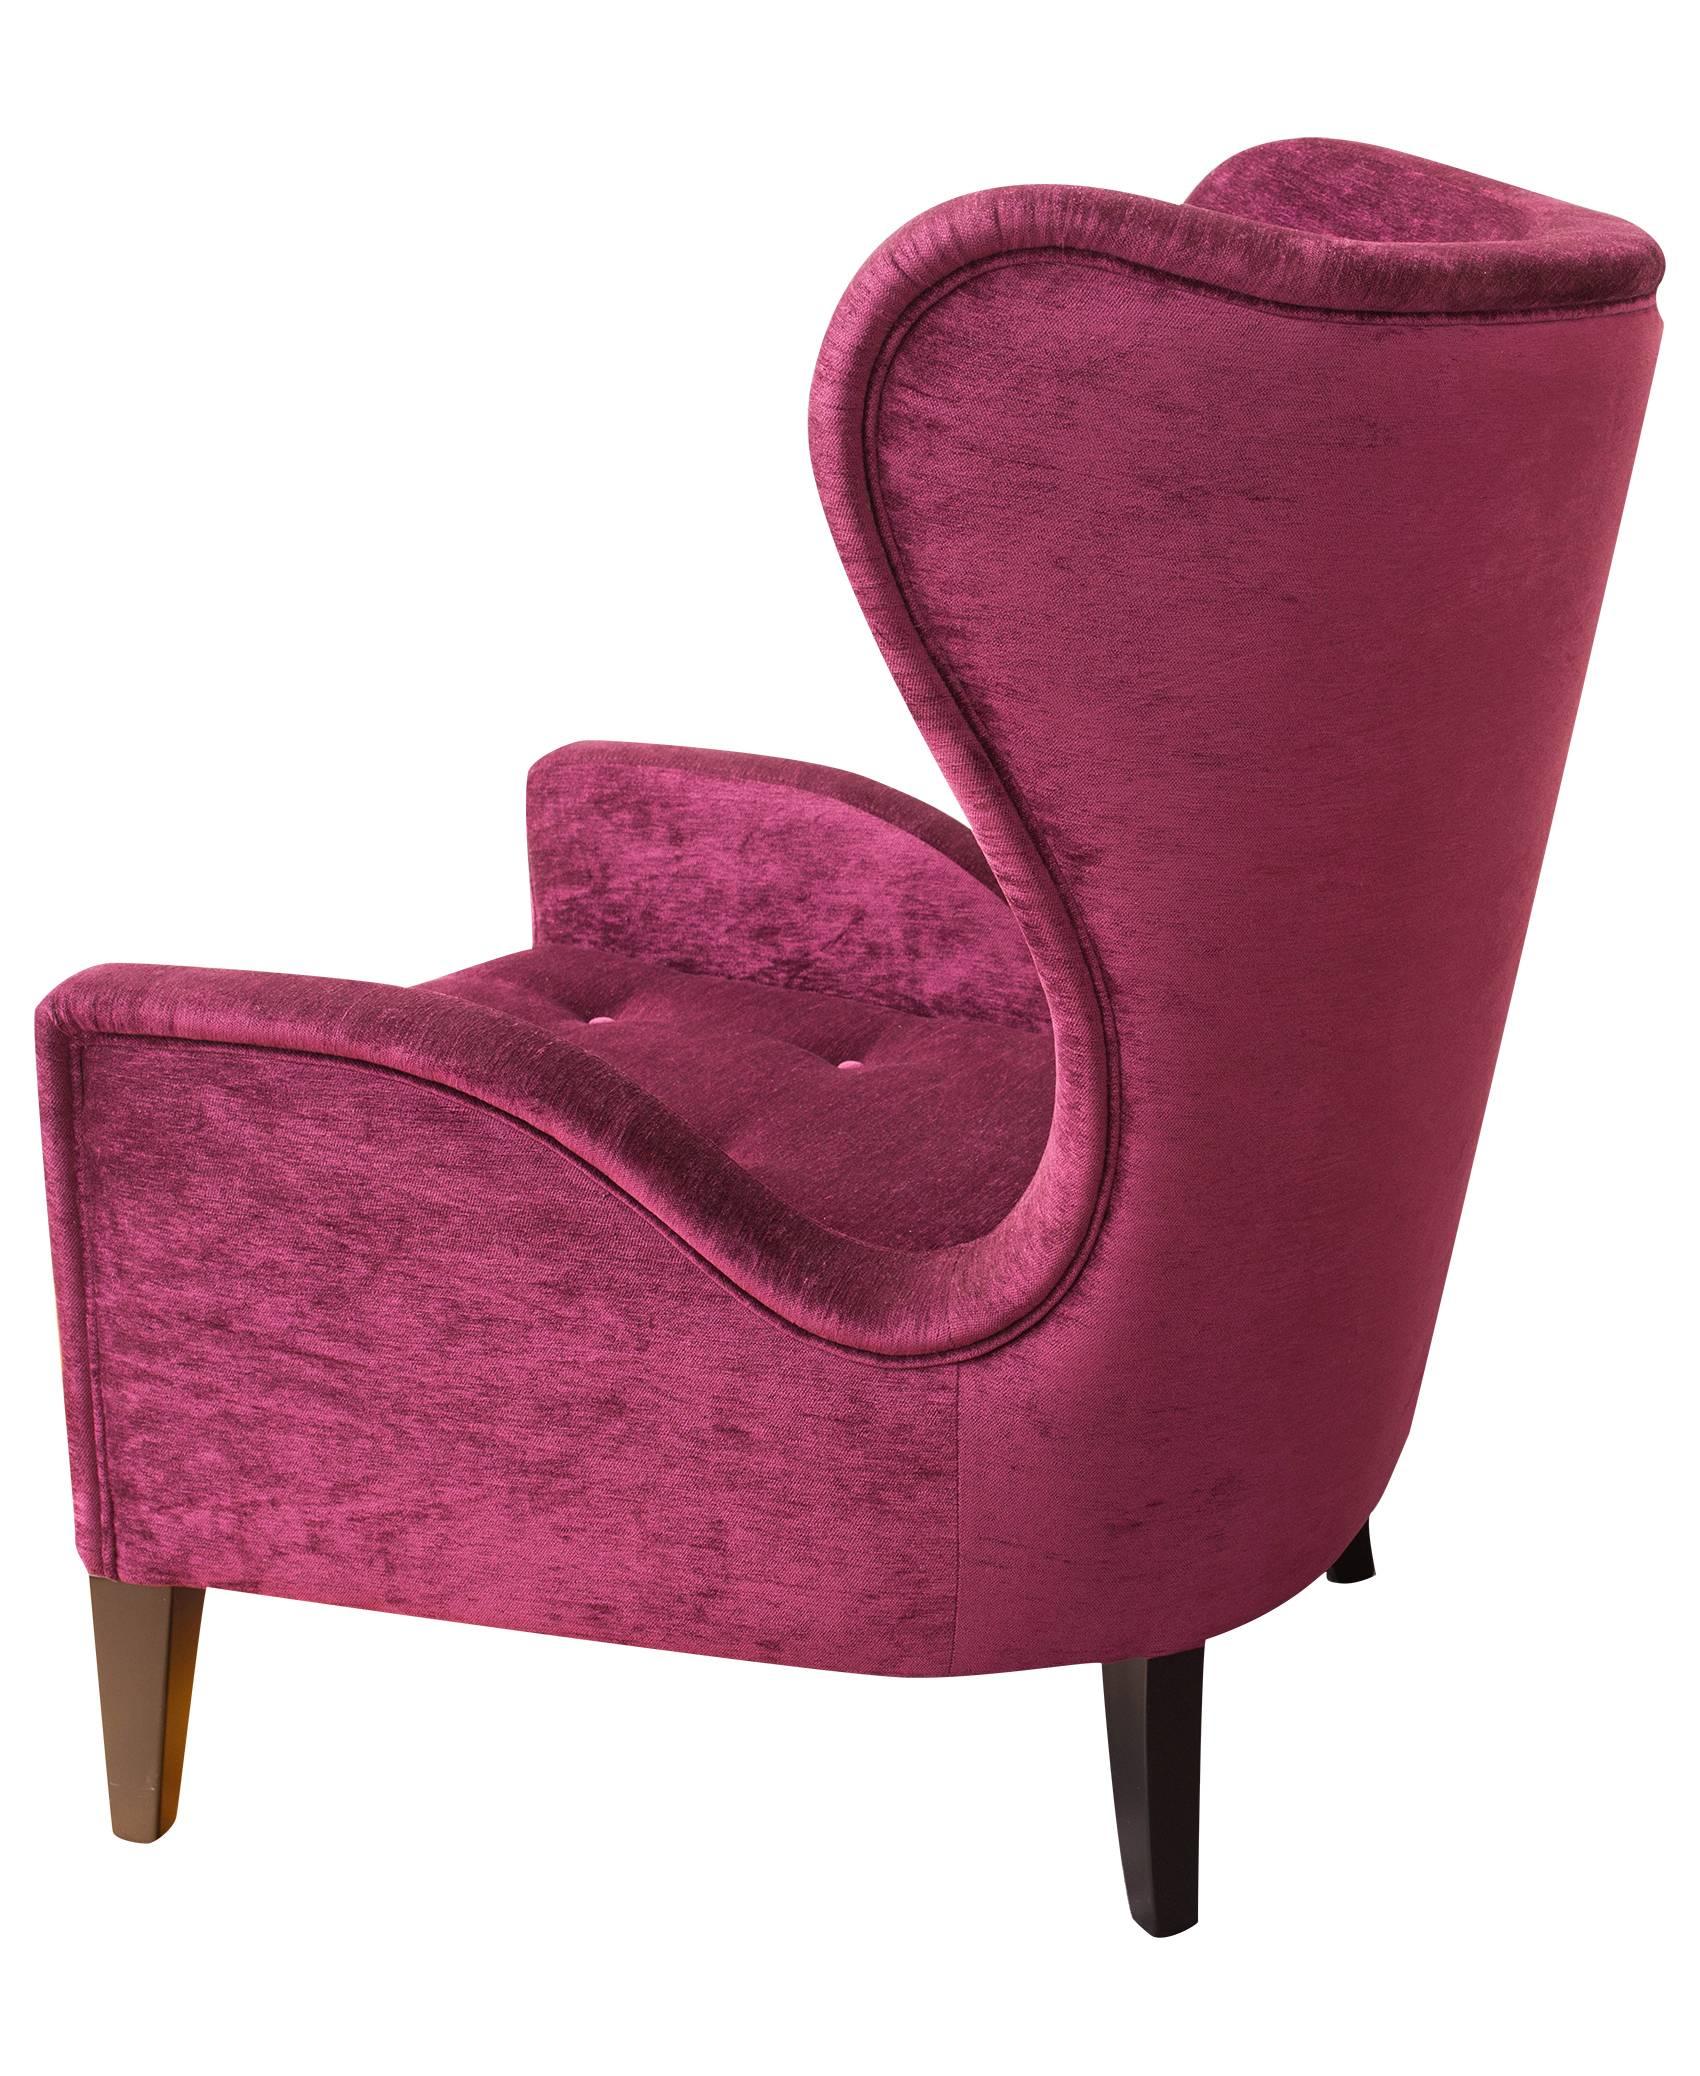 A decidedly contemporary wingback chair with a touch of retro. Commercial grade magenta velvet upholstery with solid wood structure and fire-resistant foams. Incredibly comfortable.